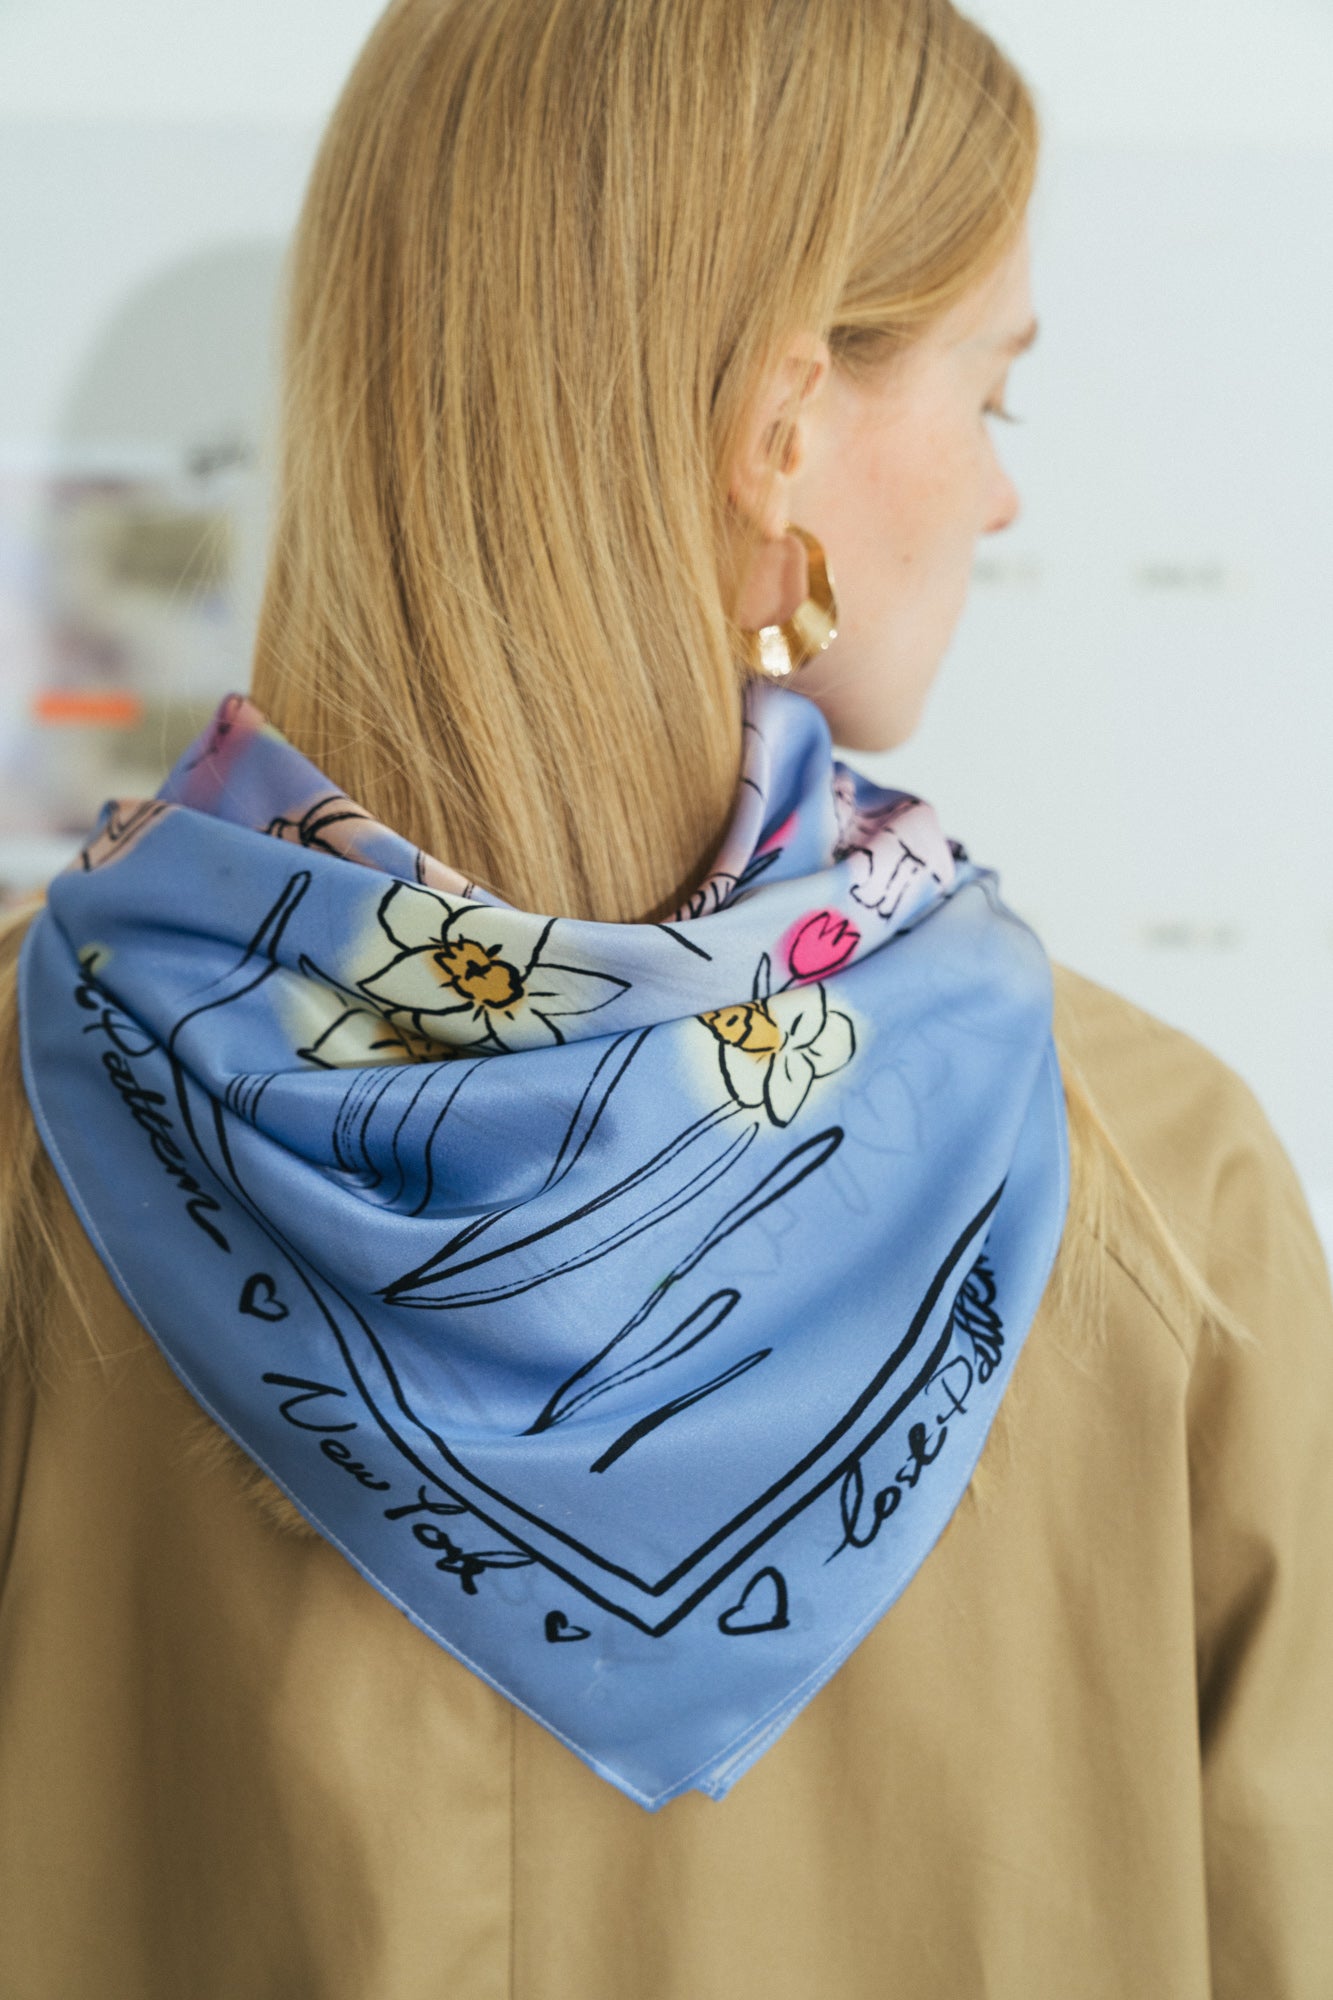 "New York in Sketches" Silk Scarf - Blue - LOST PATTERN Silk Square Scarf